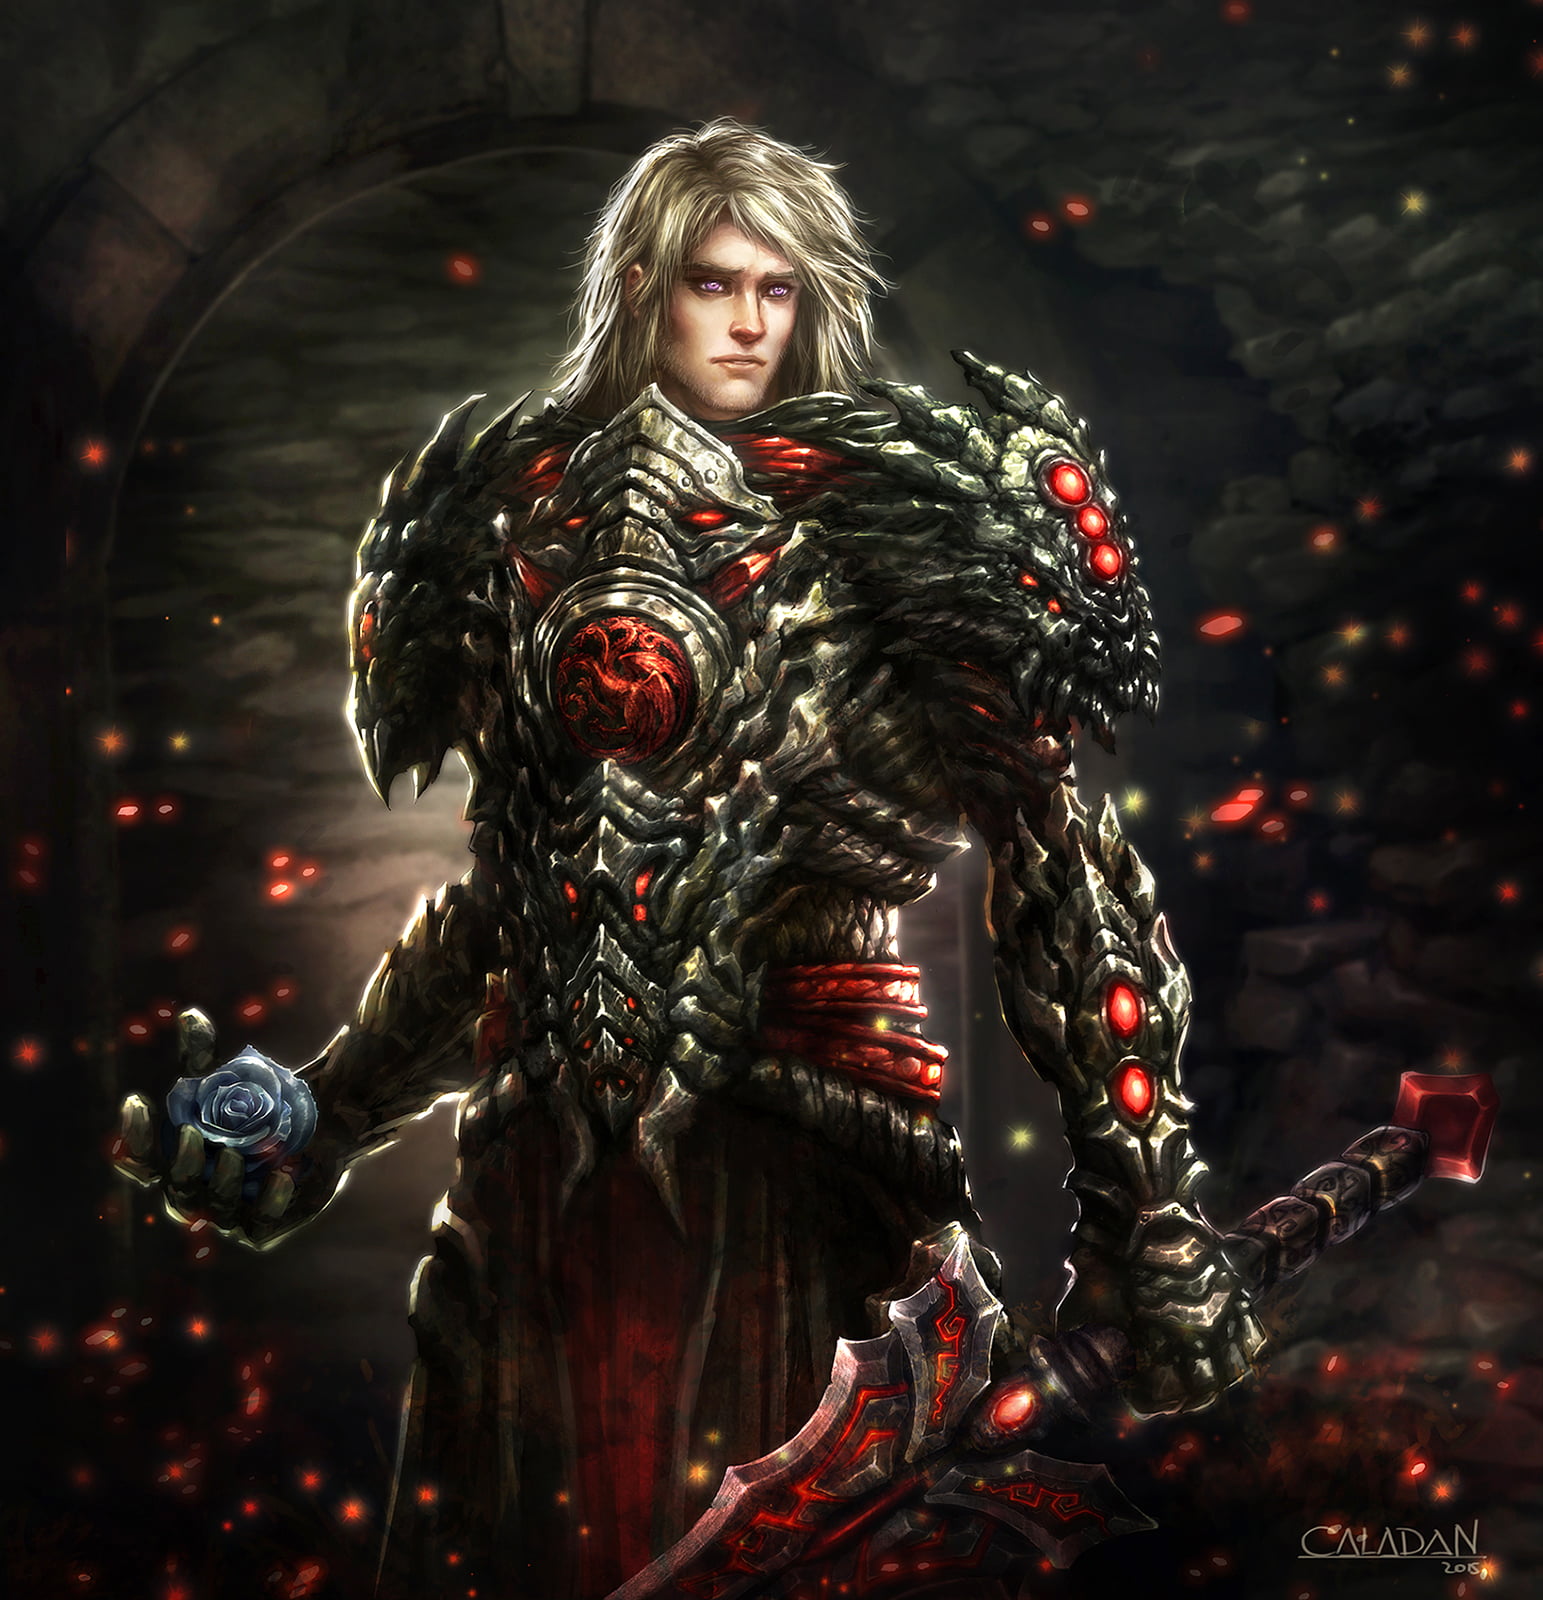 Man In Black And Red Fantasy Armor Illustration Rhaegar Targaryen A Song Of Ice And Fire Blonde Violet Eyes Hd Wallpaper Wallpaper Flare